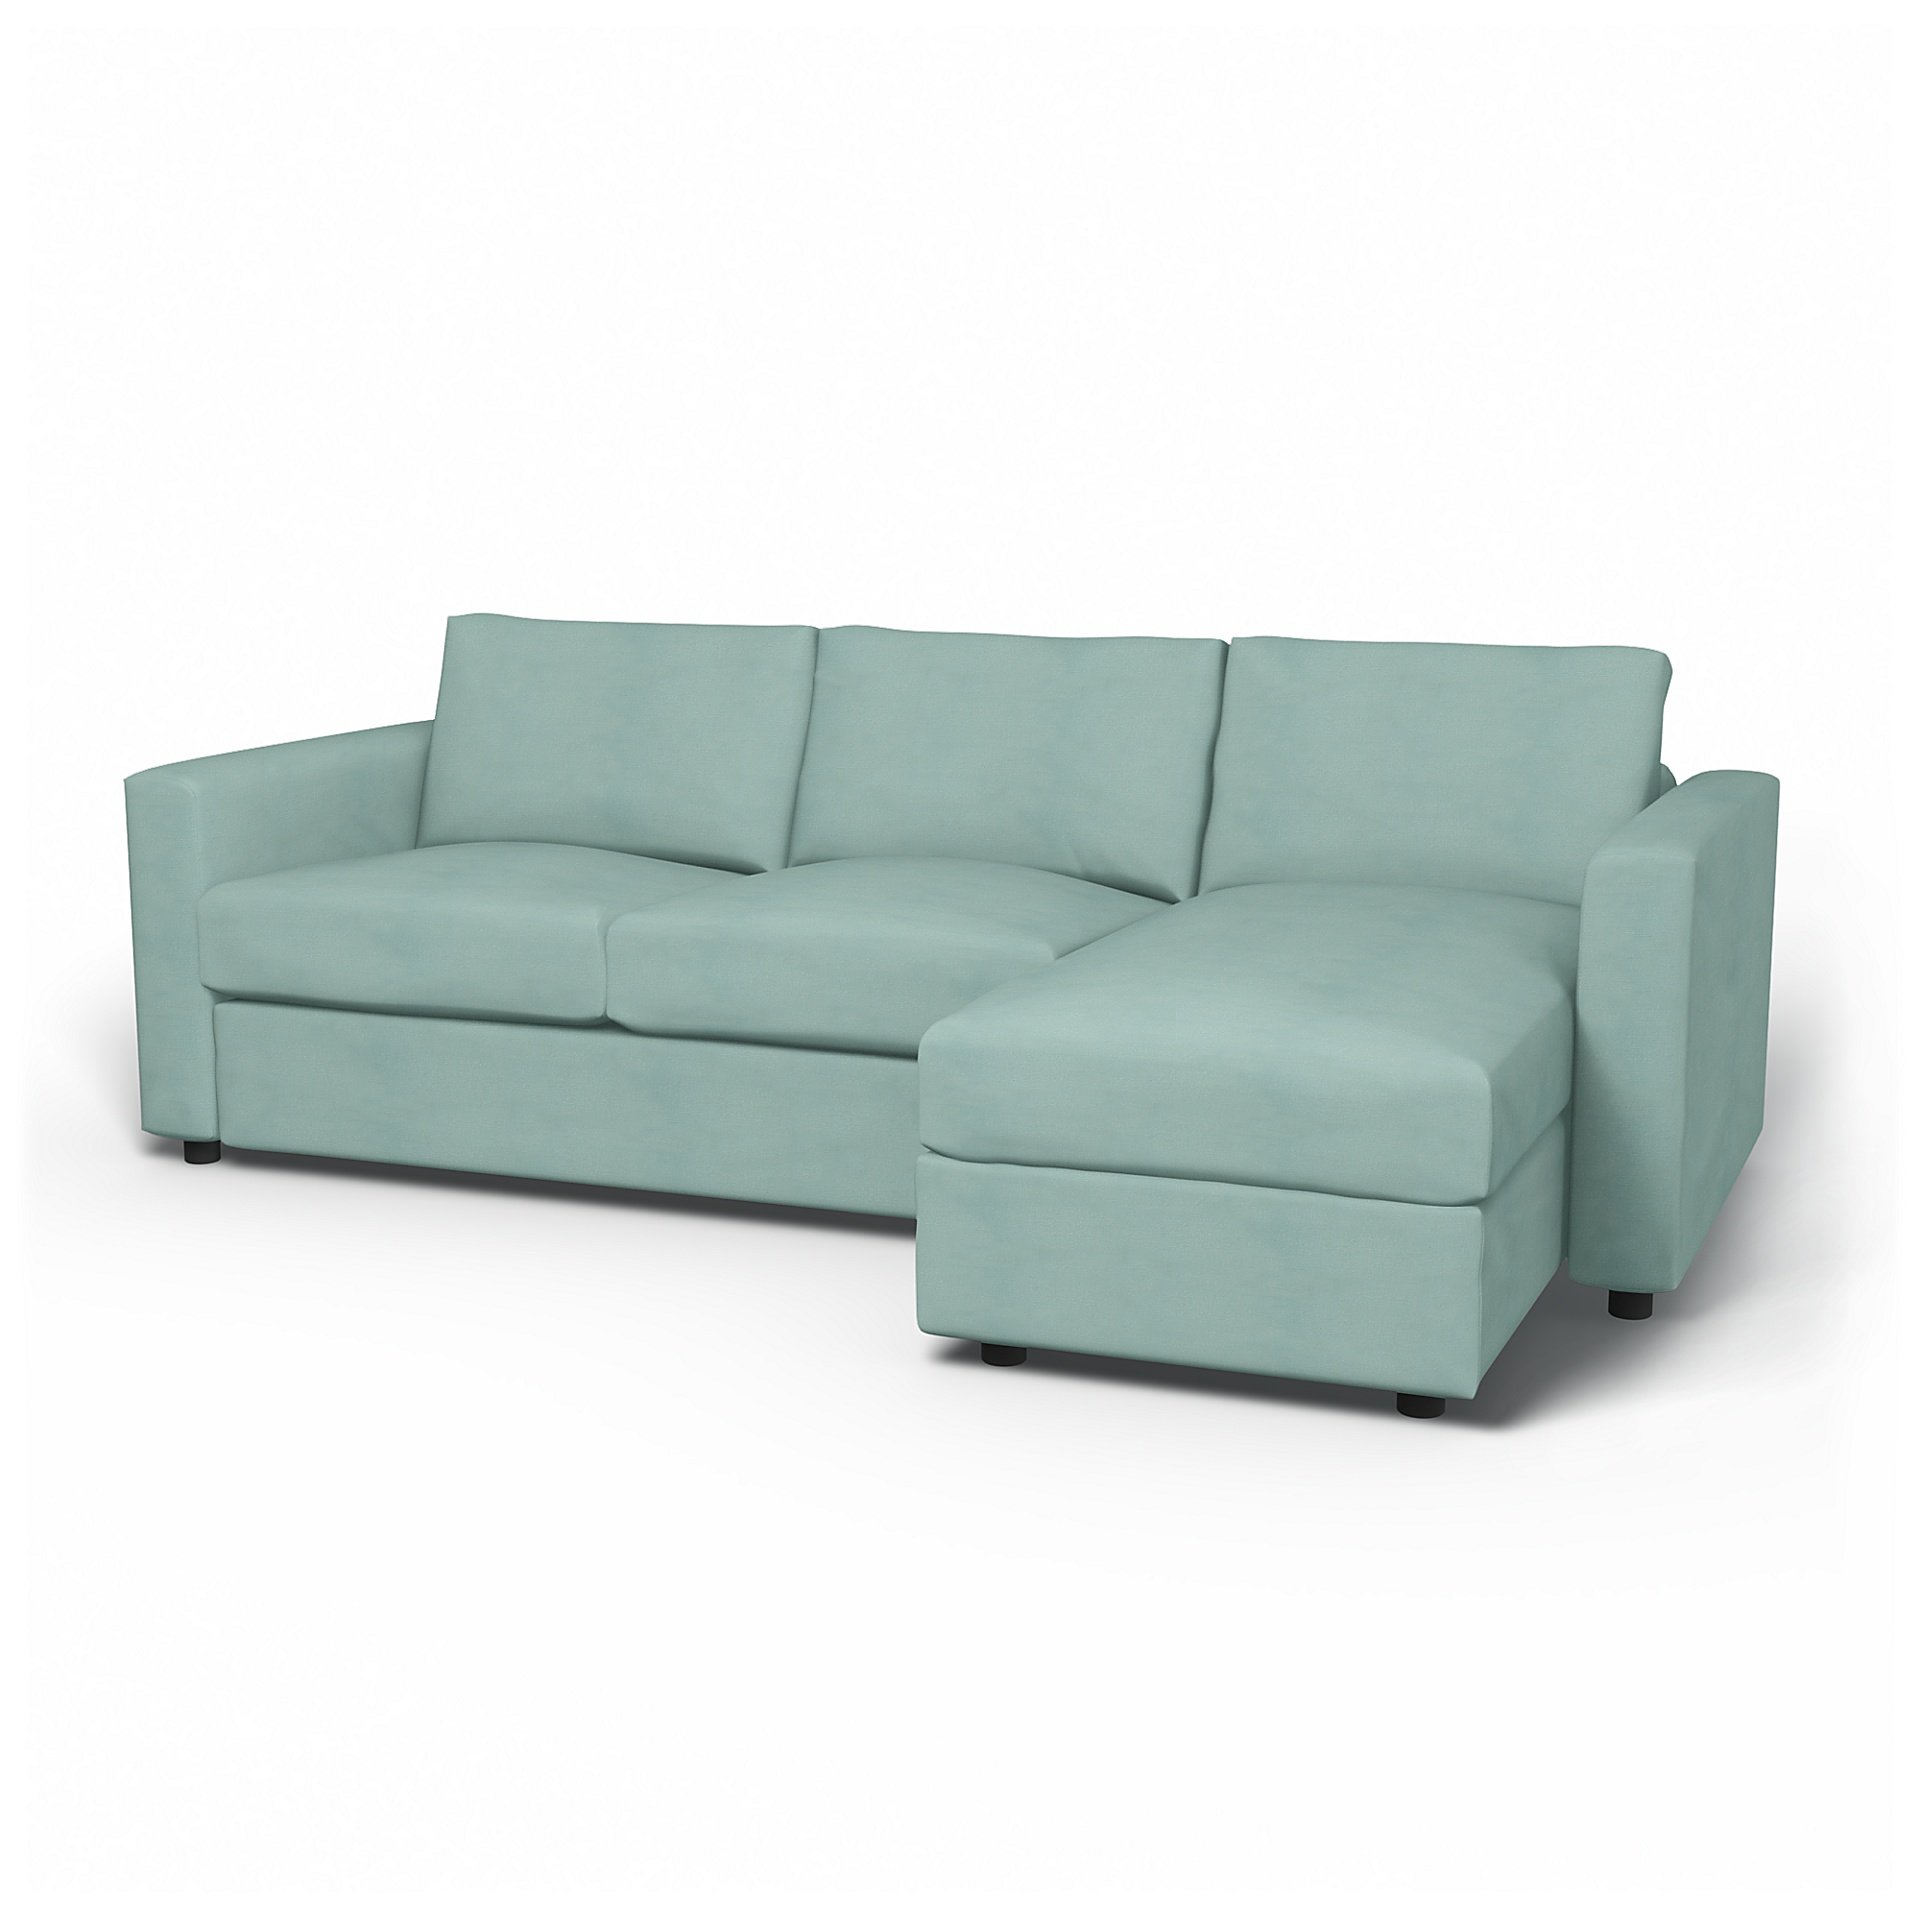 IKEA - Vimle 2 Seater Sofa with Chaise Cover, Mineral Blue, Linen - Bemz